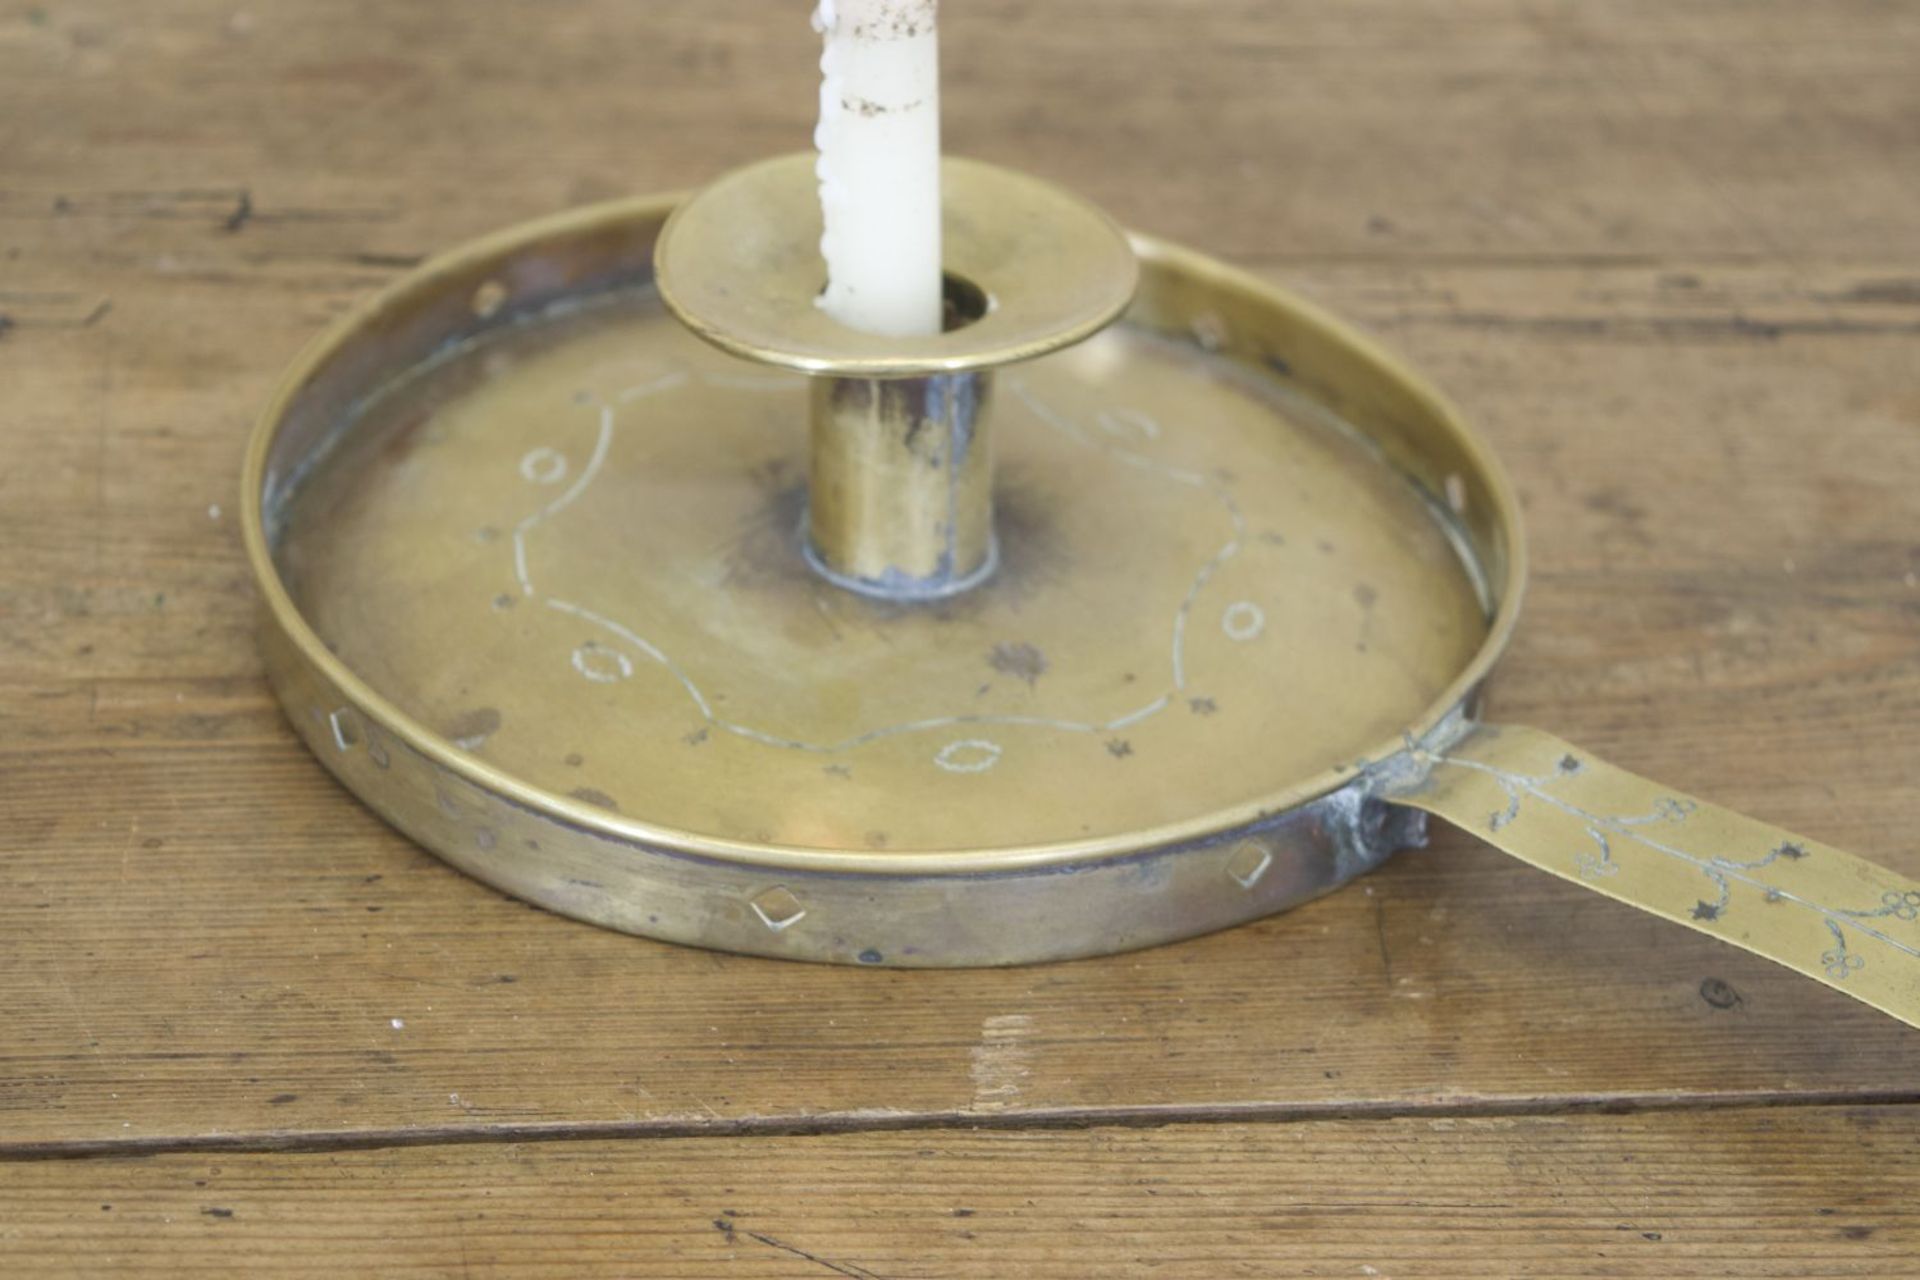 19TH-CENTURY BRASS CHAMBER CANDLESTICK - Image 2 of 2